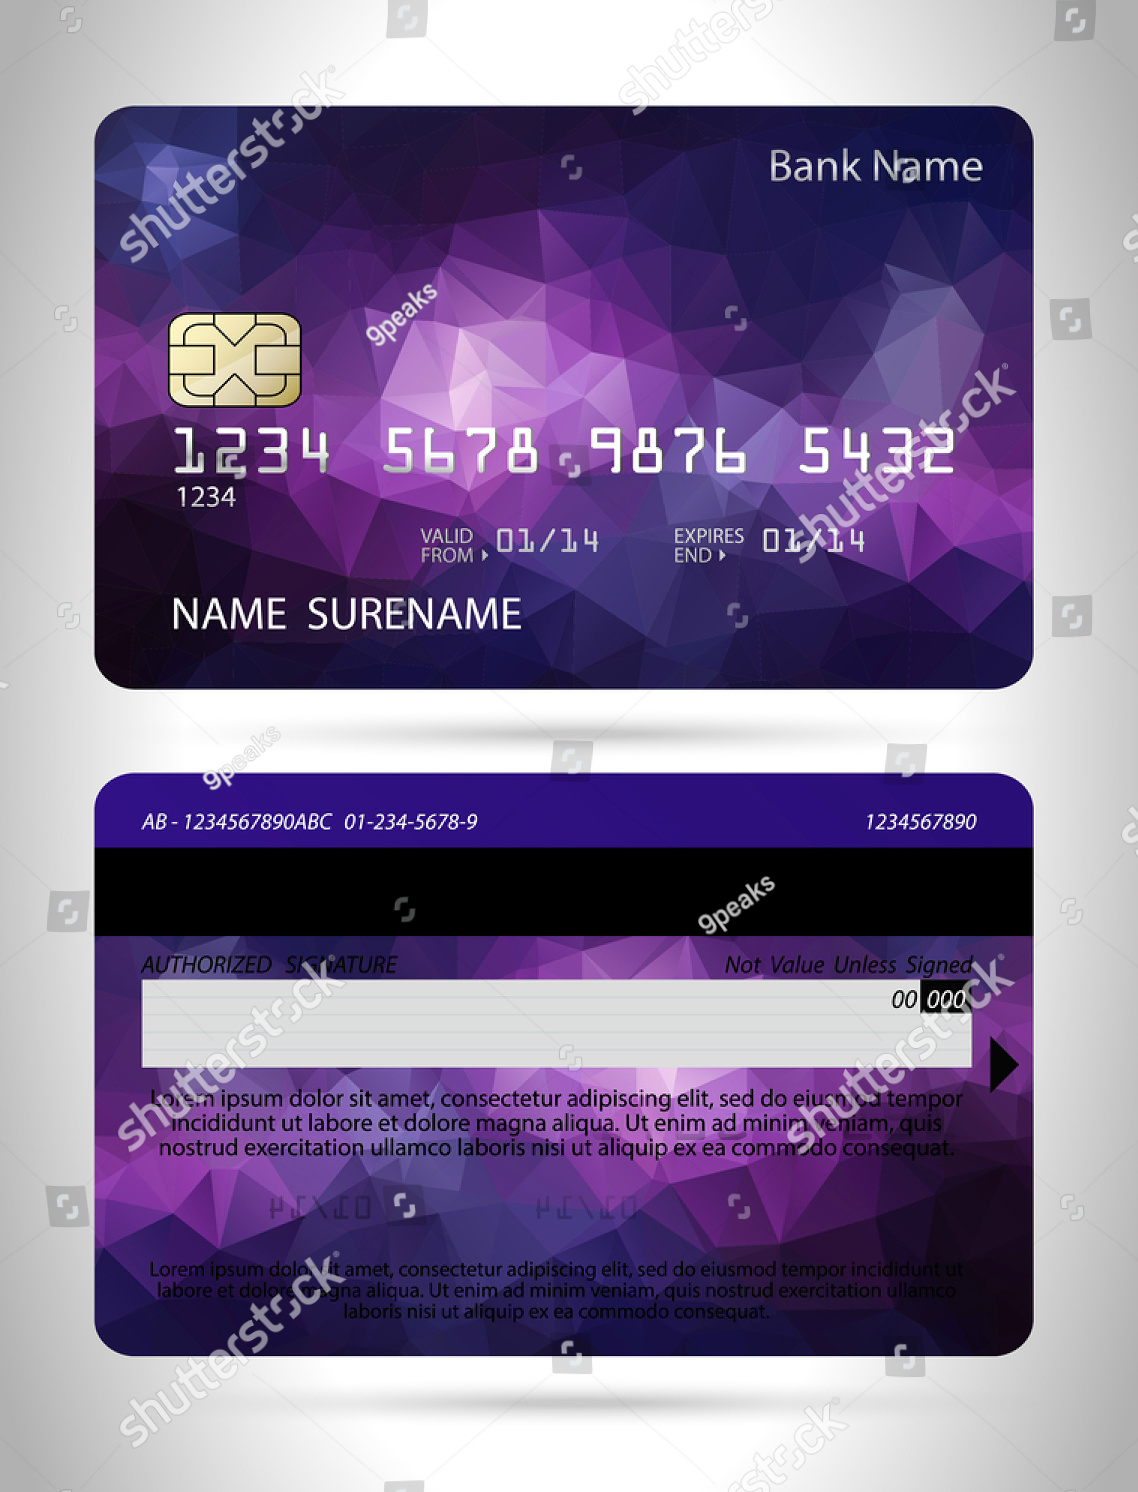 20 Credit Card Designs  Free & Premium Templates With Regard To Credit Card Template For Kids